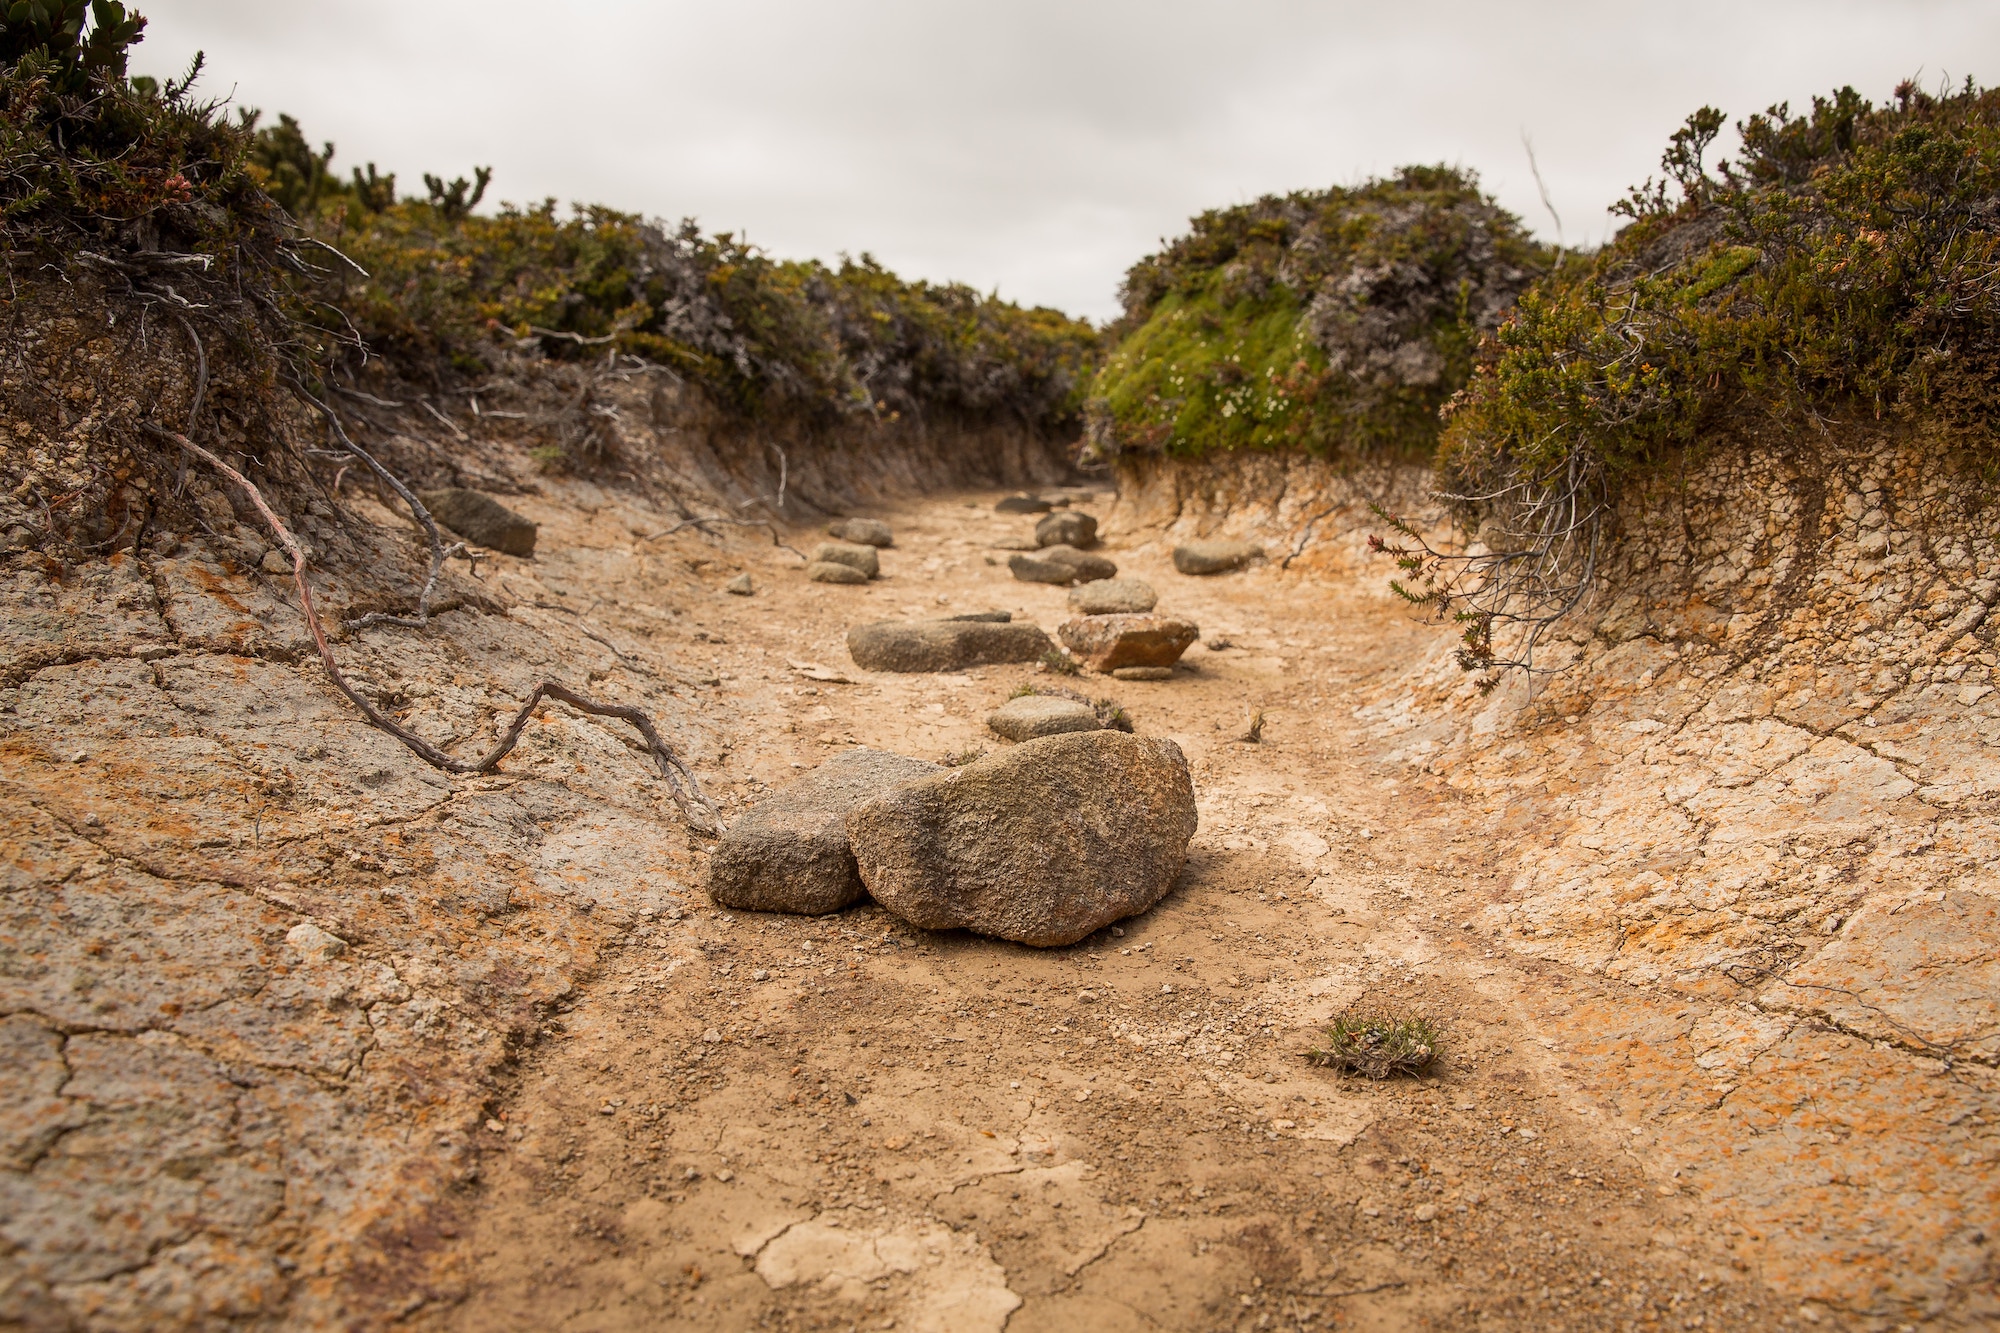 dry river bed, grief Featured Photo by Matt Palmer on Unsplash